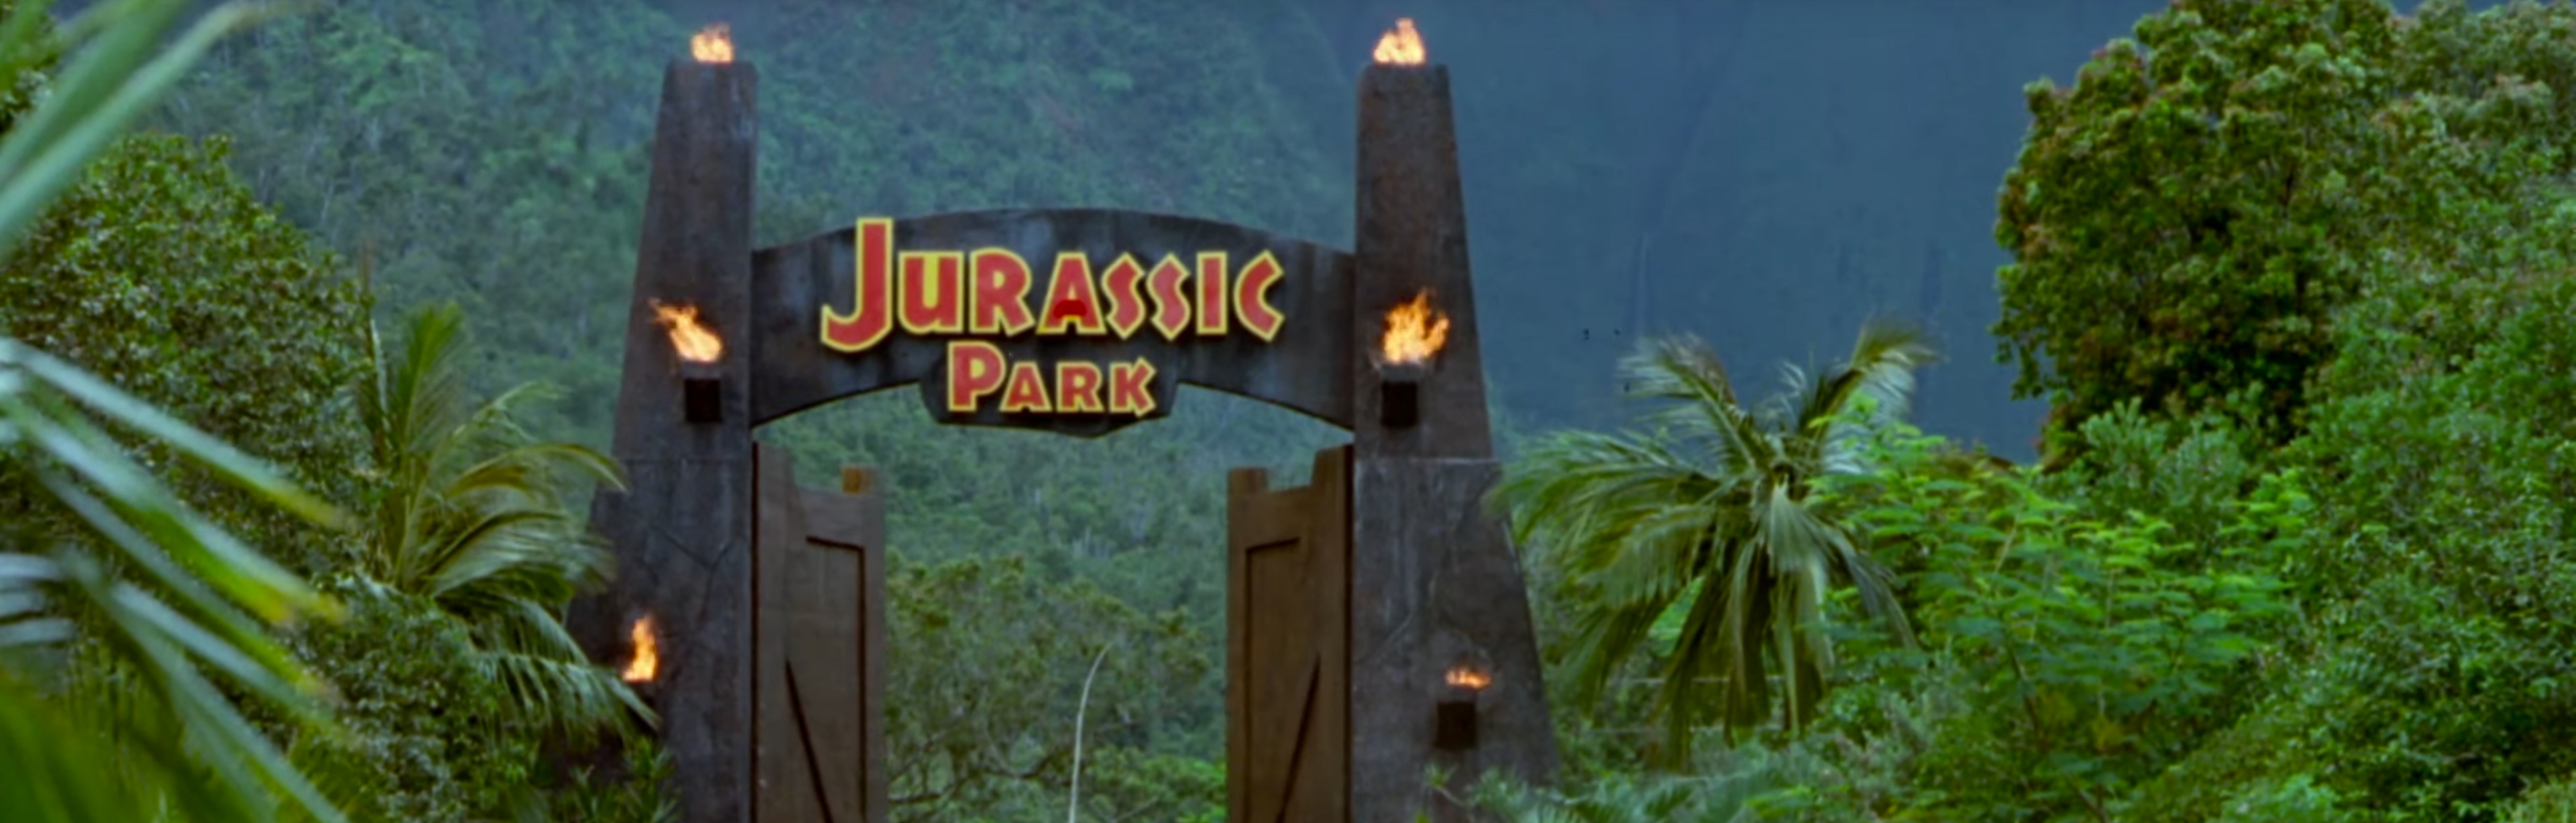 the entry gate to Jurassic Park.